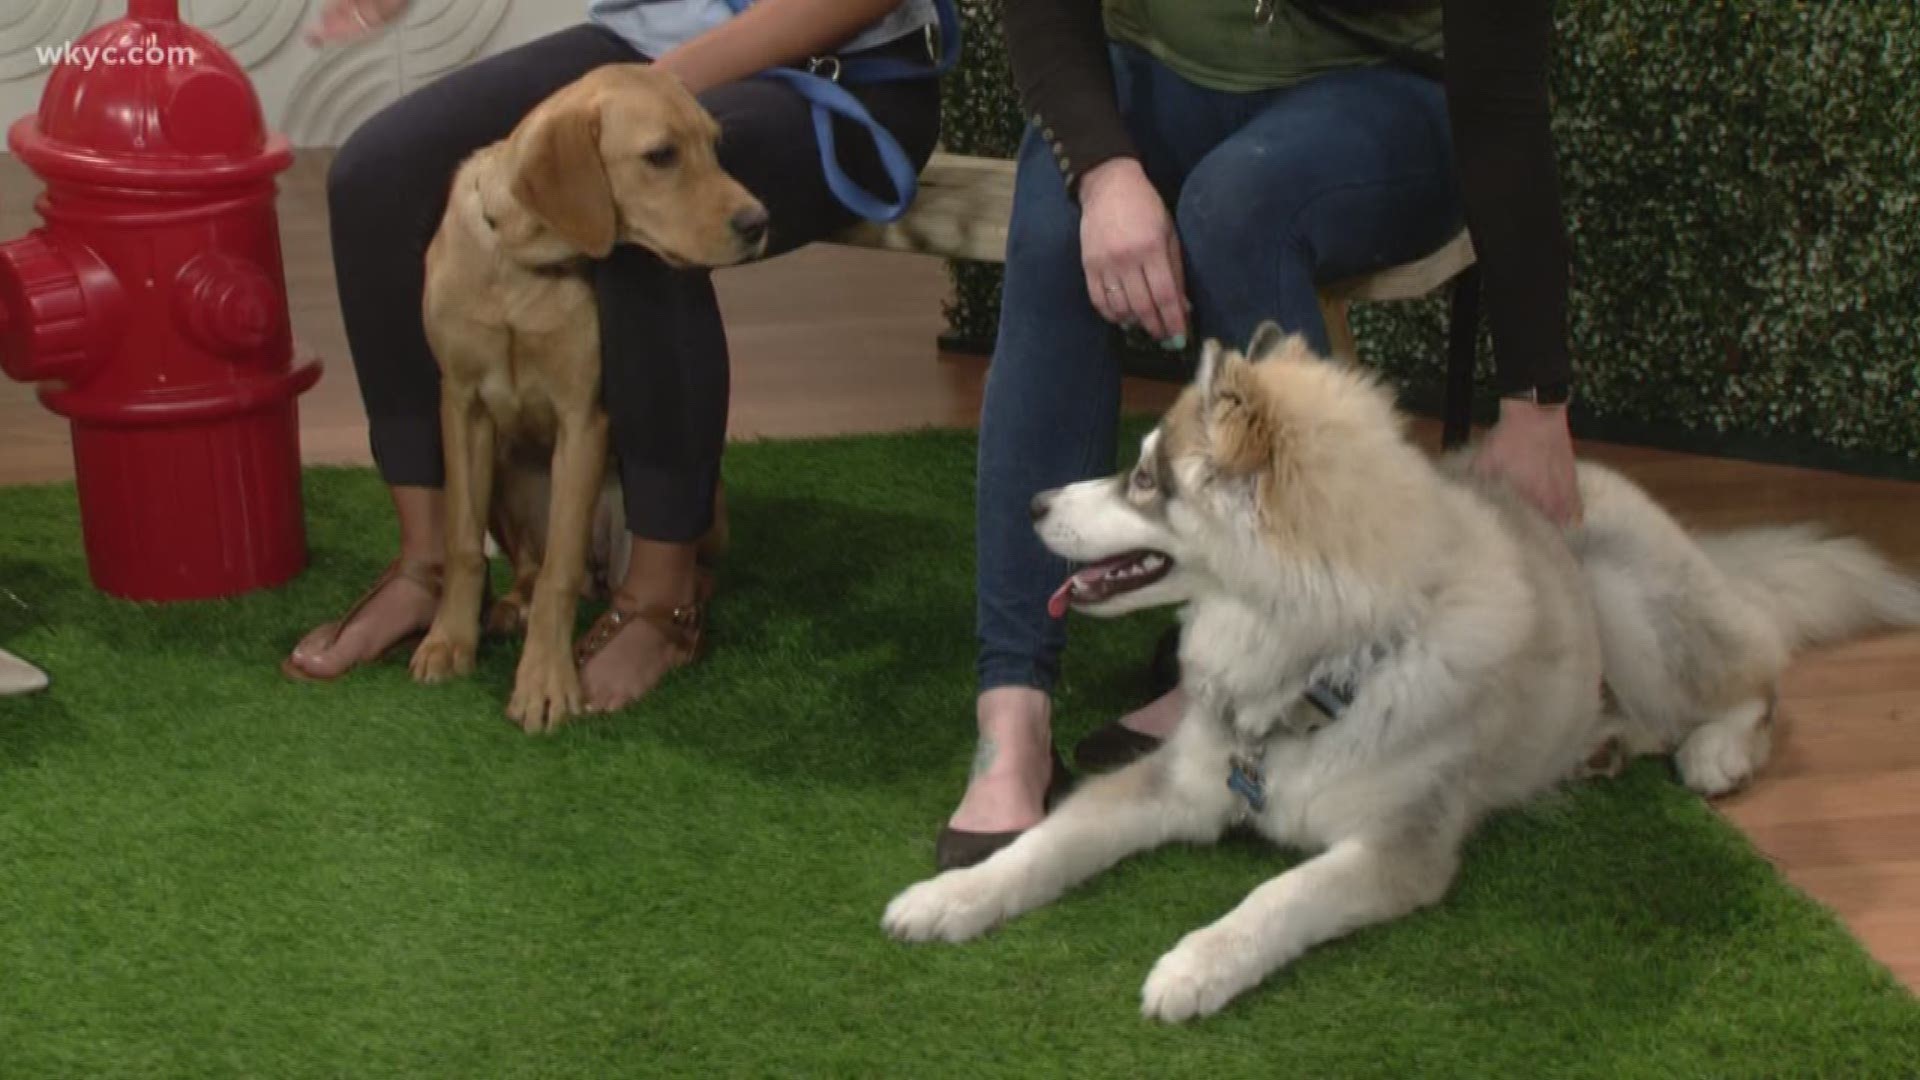 July 16, 2019: It was puppy playtime on the morning show as Roxy brought along a friend. This is Tater Tot, another dog going through Wags 4 Warriors service training.